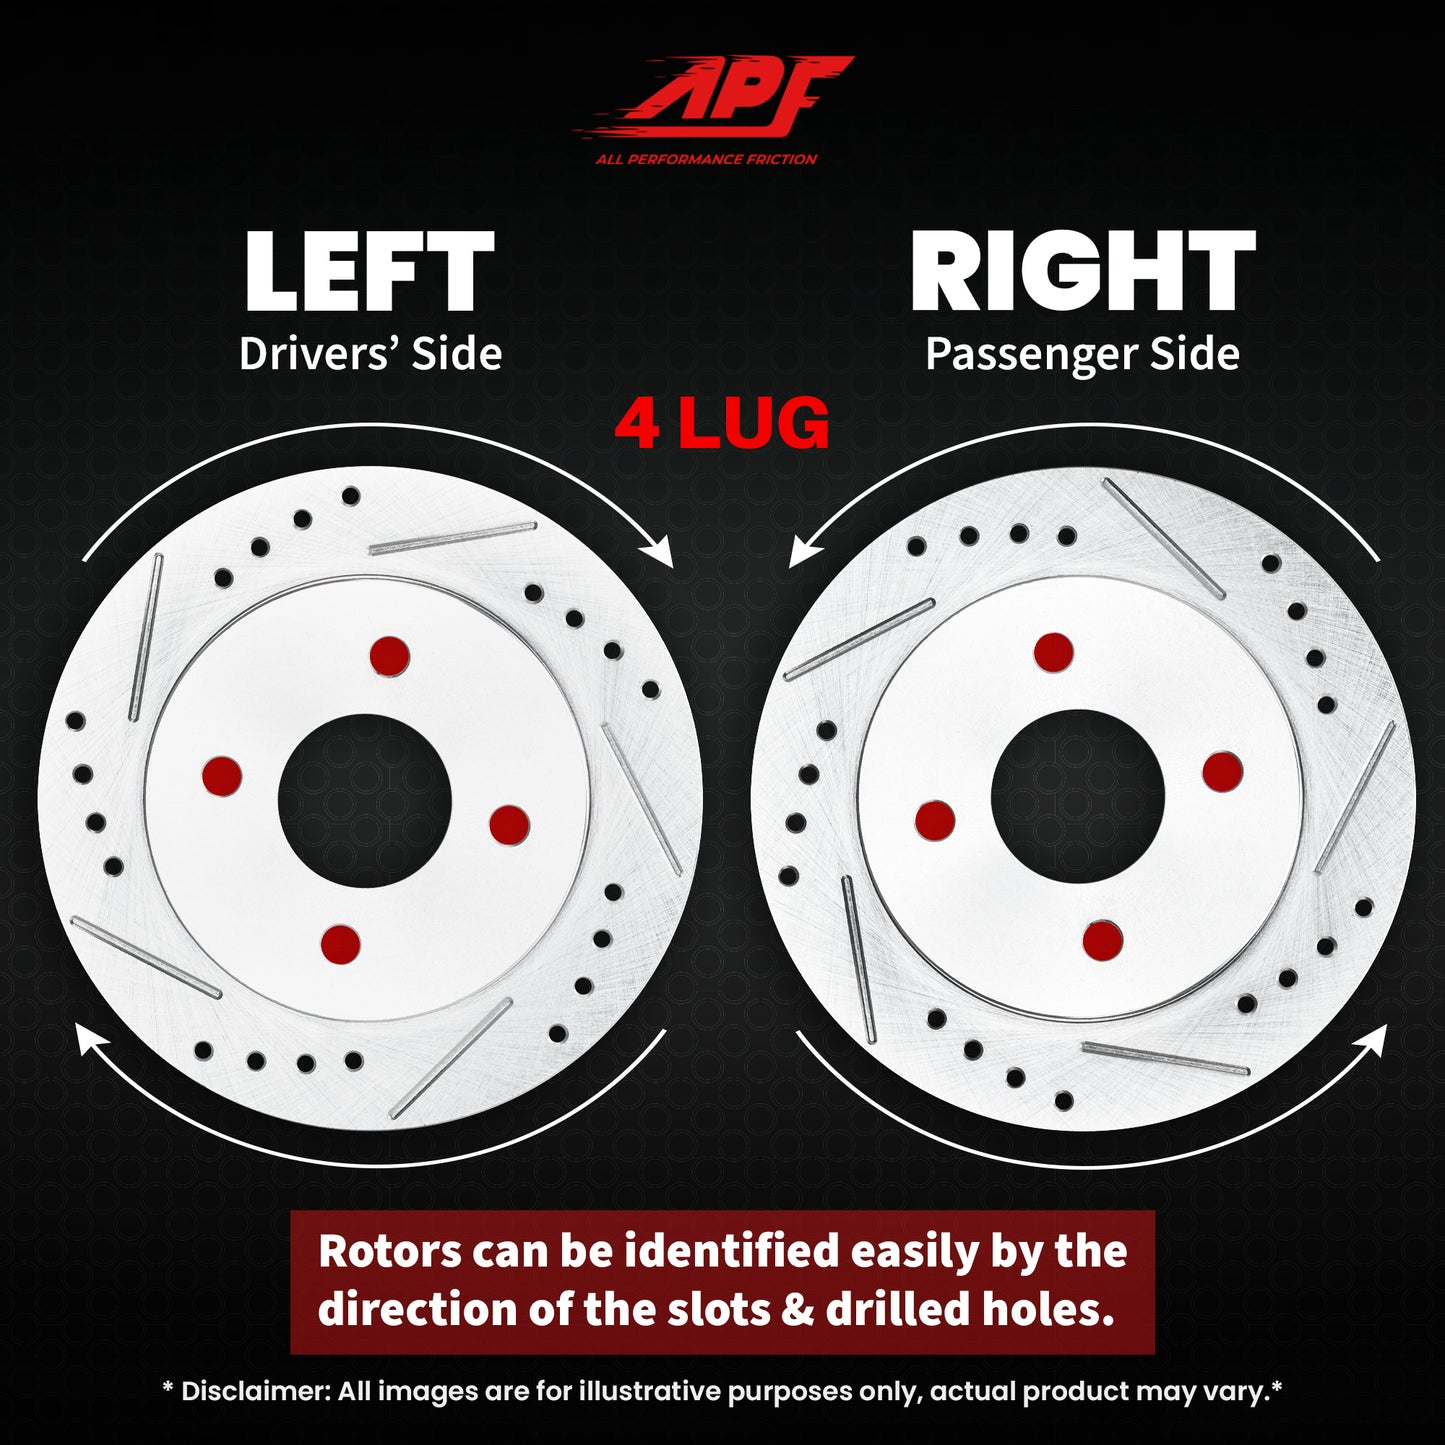 APF All Performance Friction Front and Rear Rotors and Pads Full Kit compatible with Acura CL 1998-1999 Zinc Drilled Slotted Rotors with Ceramic Carbon Fiber Brake Pads | $328.36